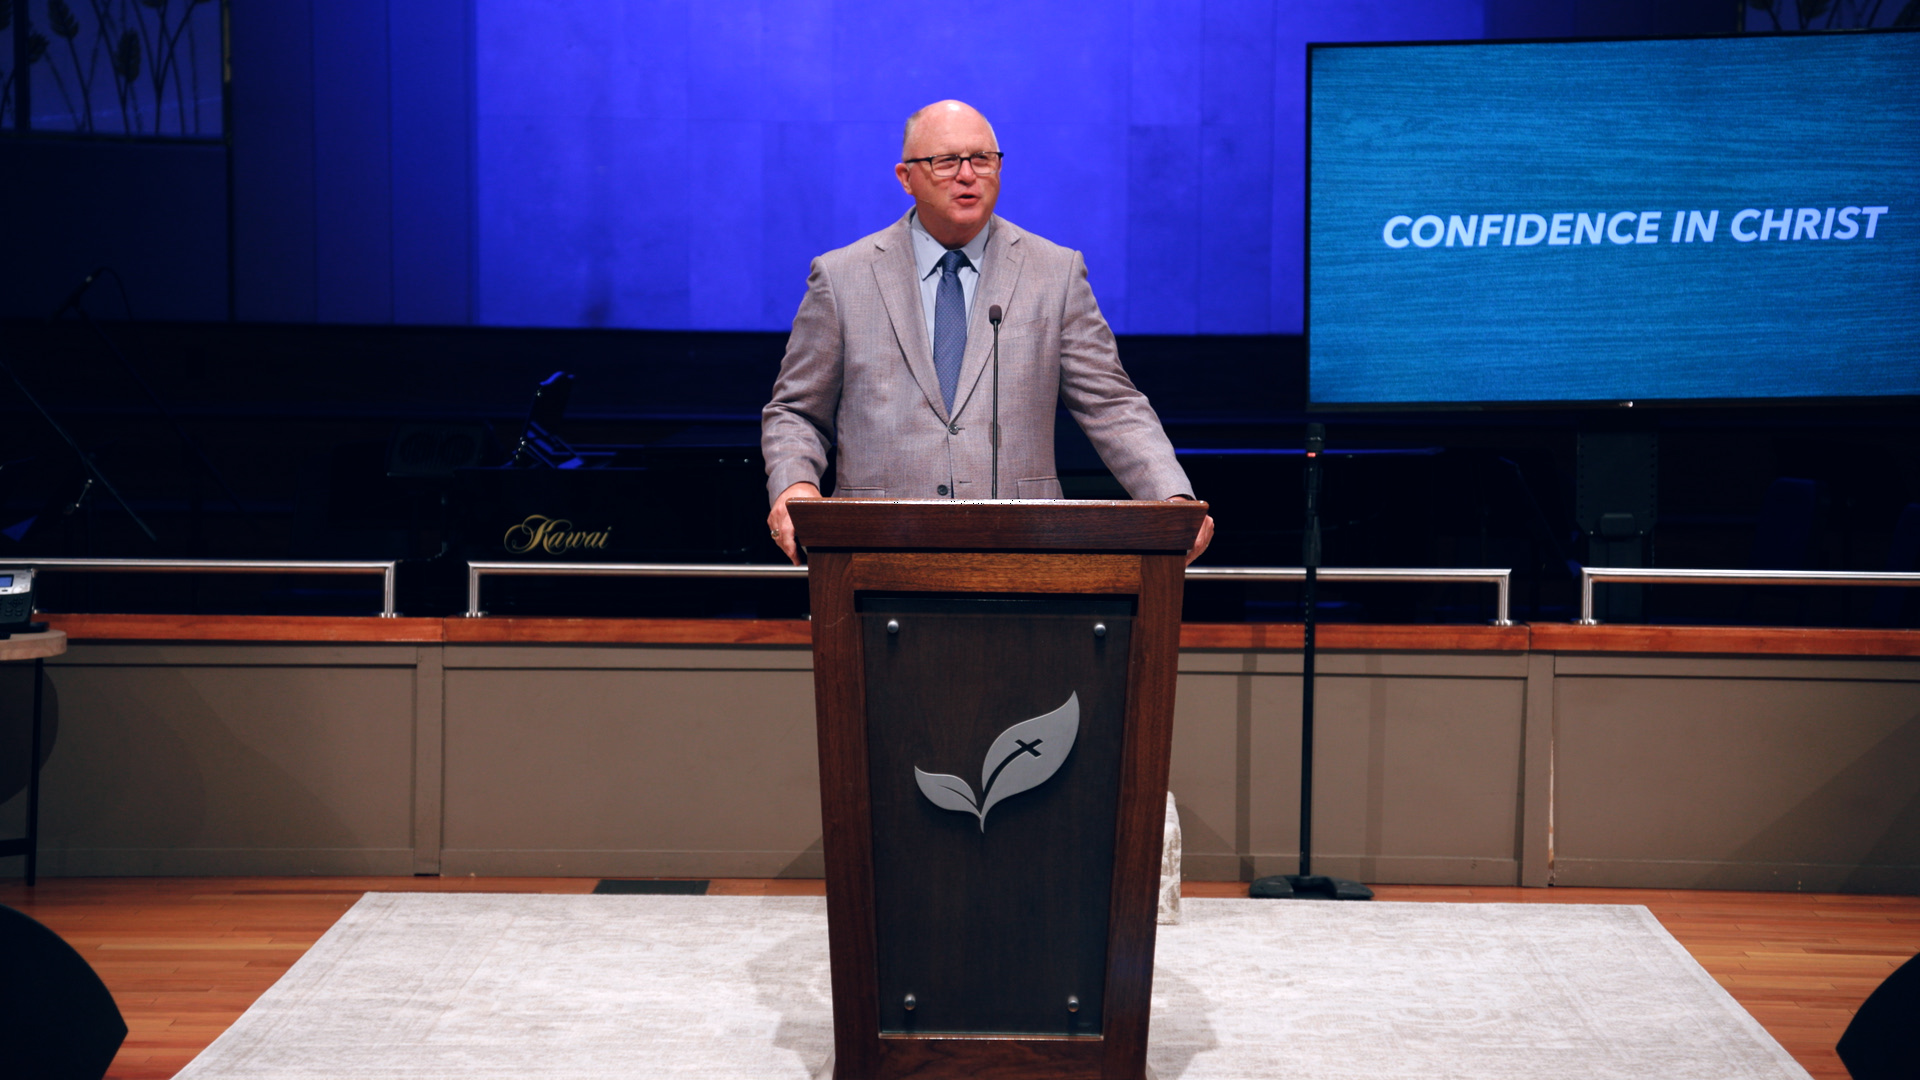 Pastor Paul Chappell: Confidence in Christ